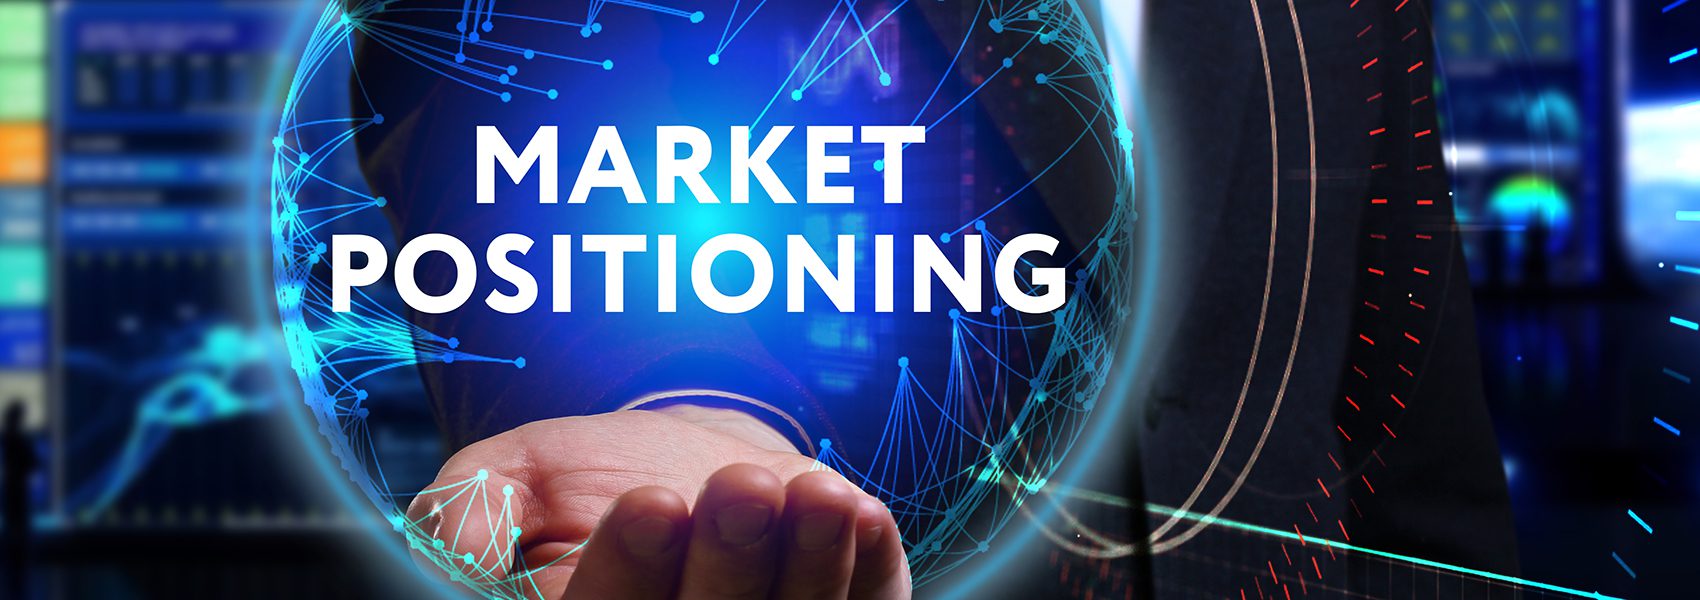 how to determine market positioning